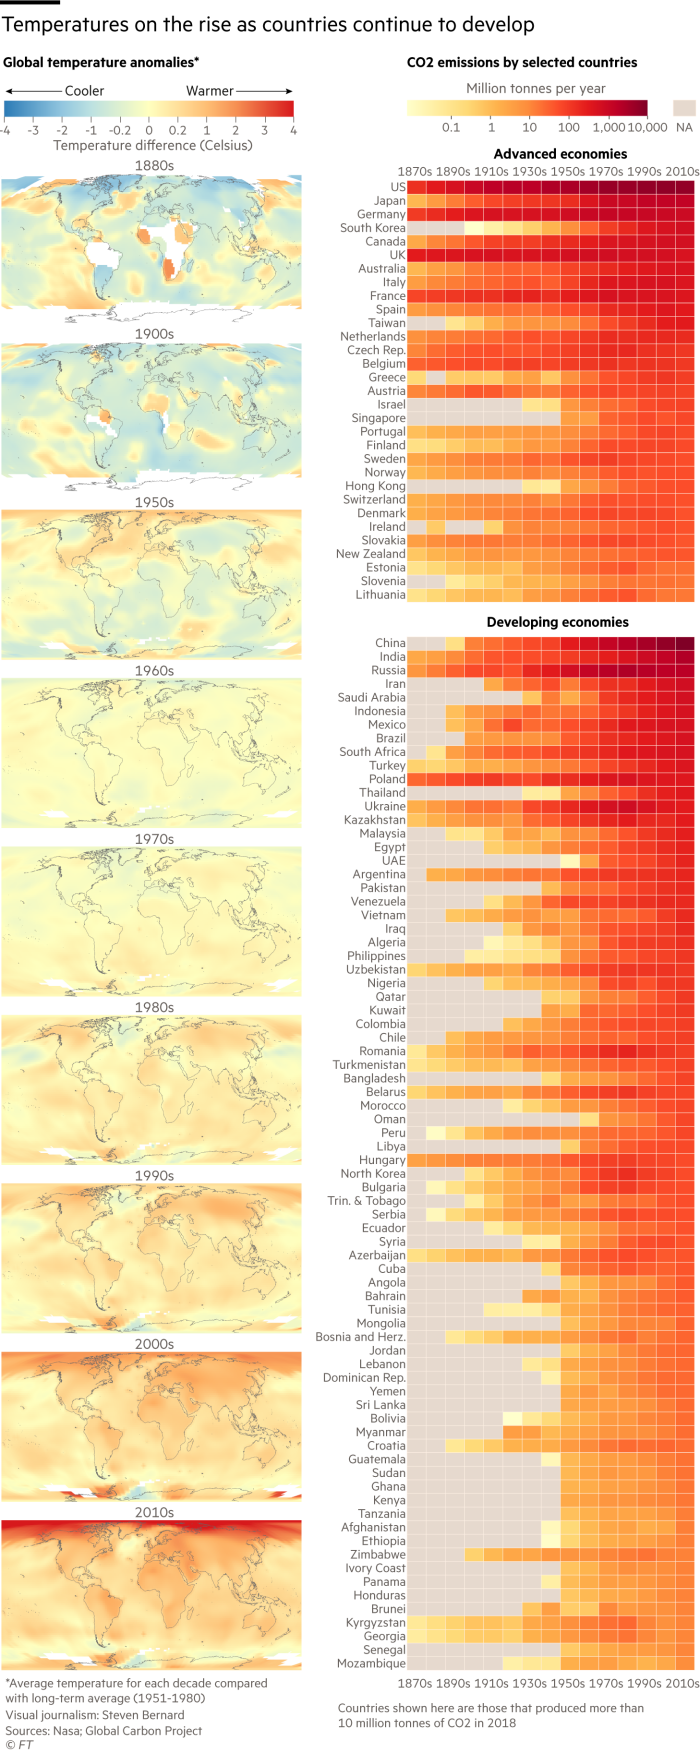 Global temperature anomalies maps from 1880 by decade. Showing average temperature for each decade compared with long-term average (1951-1980). Also there is an xy heatmap showing country CO2 emissions by decade from 1880. There is a steady trend towards an increase in CO2 emissions which is reflected in the overall higher temperatures seen in the maps